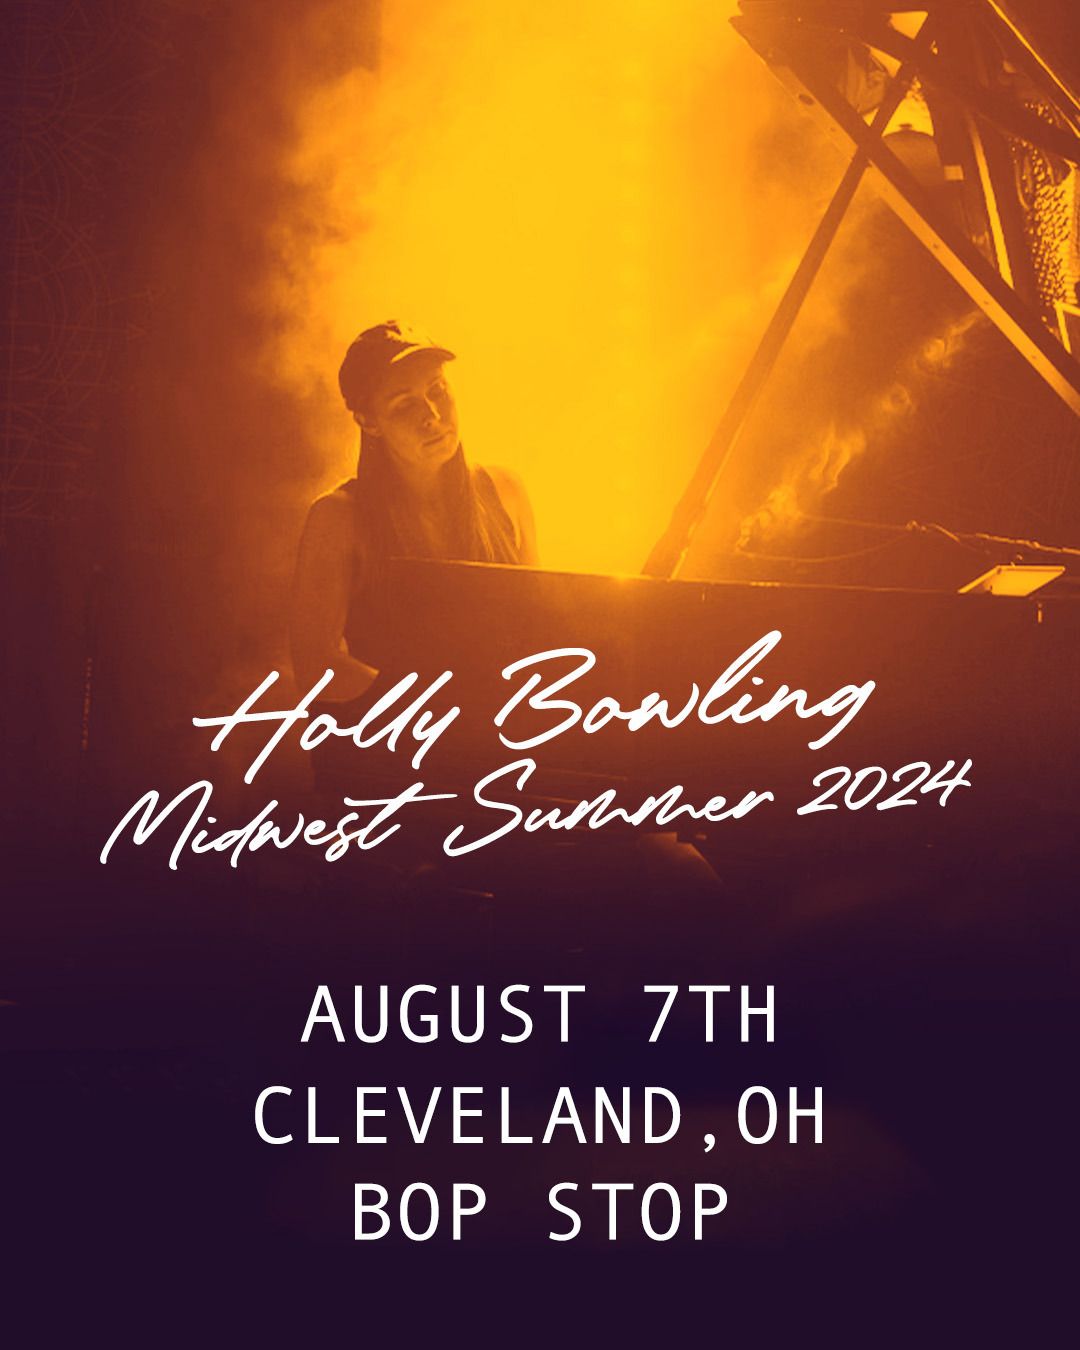 An Evening With Holly Bowling